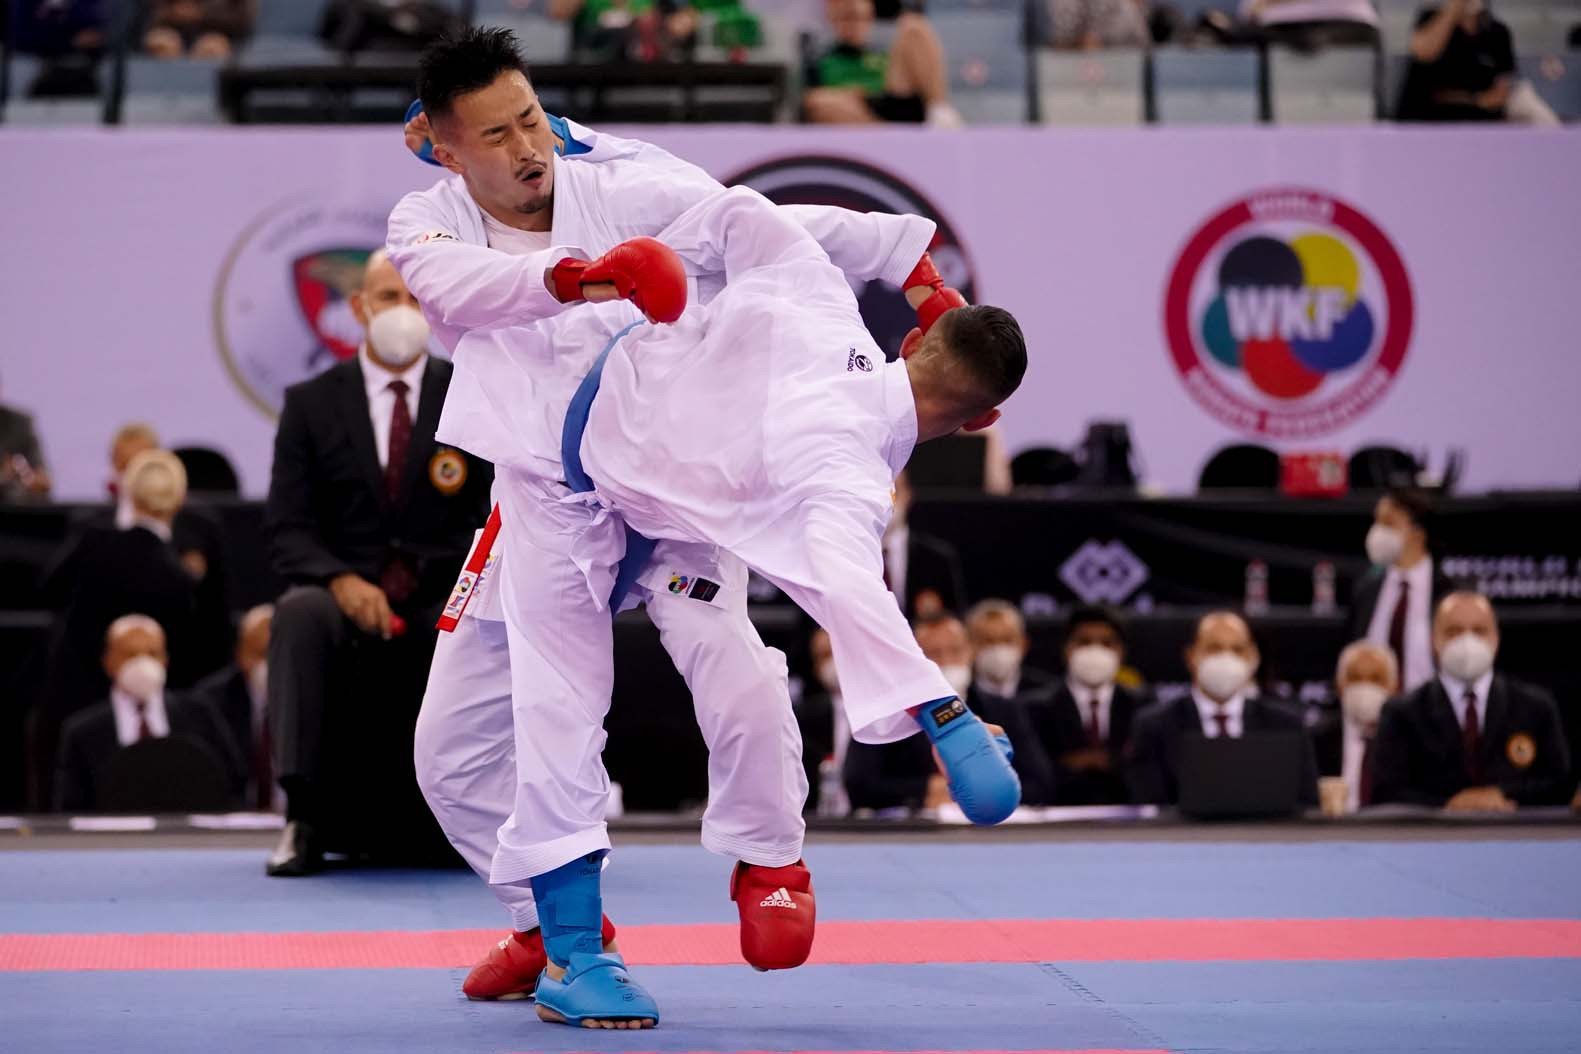 Reigning champions dominate on day two at Karate World Championships